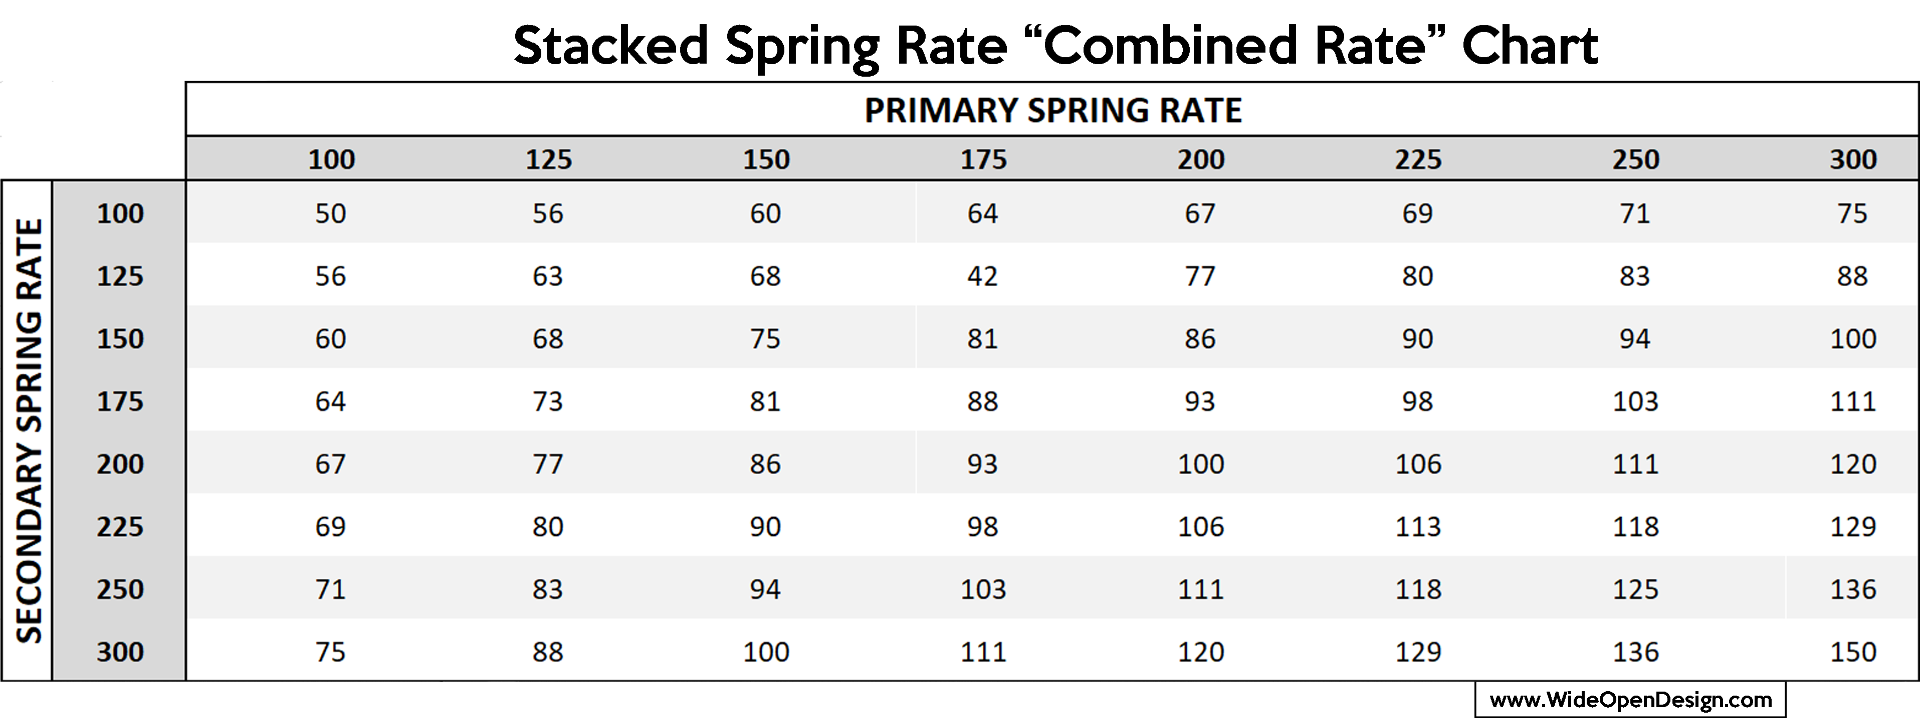 Stacked Spring Rate "Combined Rate" Chart for 16 Inch Shocks